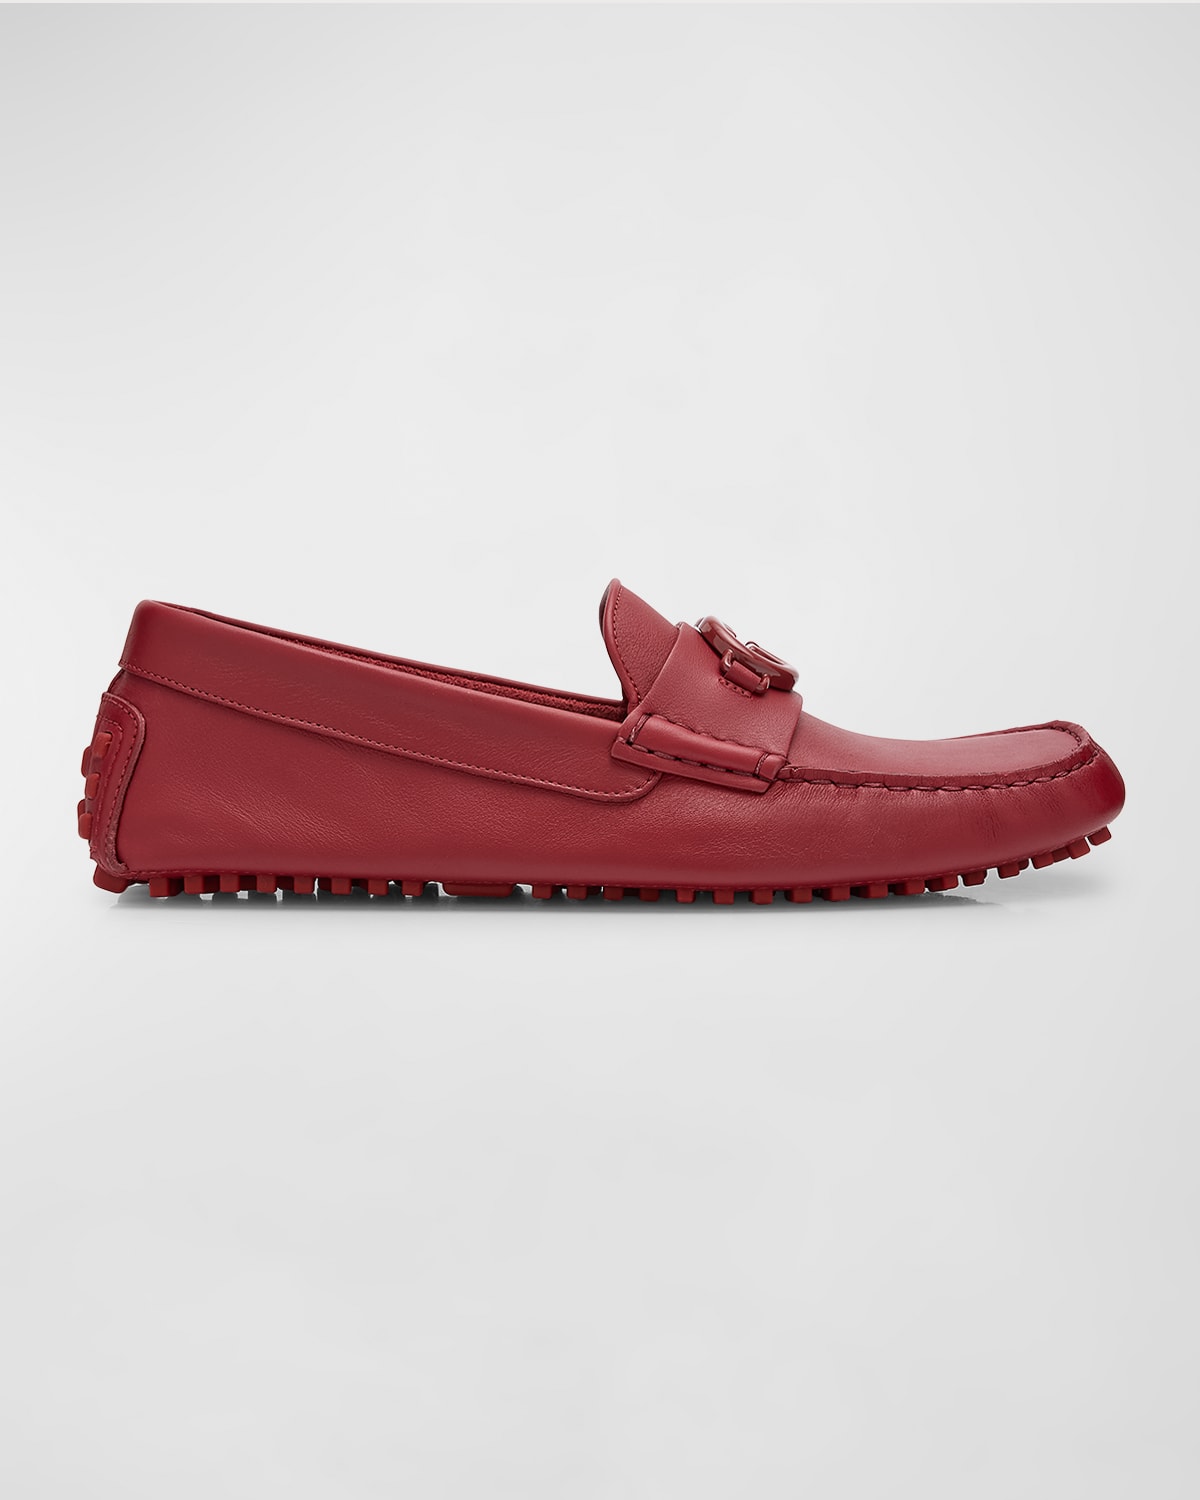 Shop Gucci Men's Ayrton Interlocking G Leather Drivers In Red